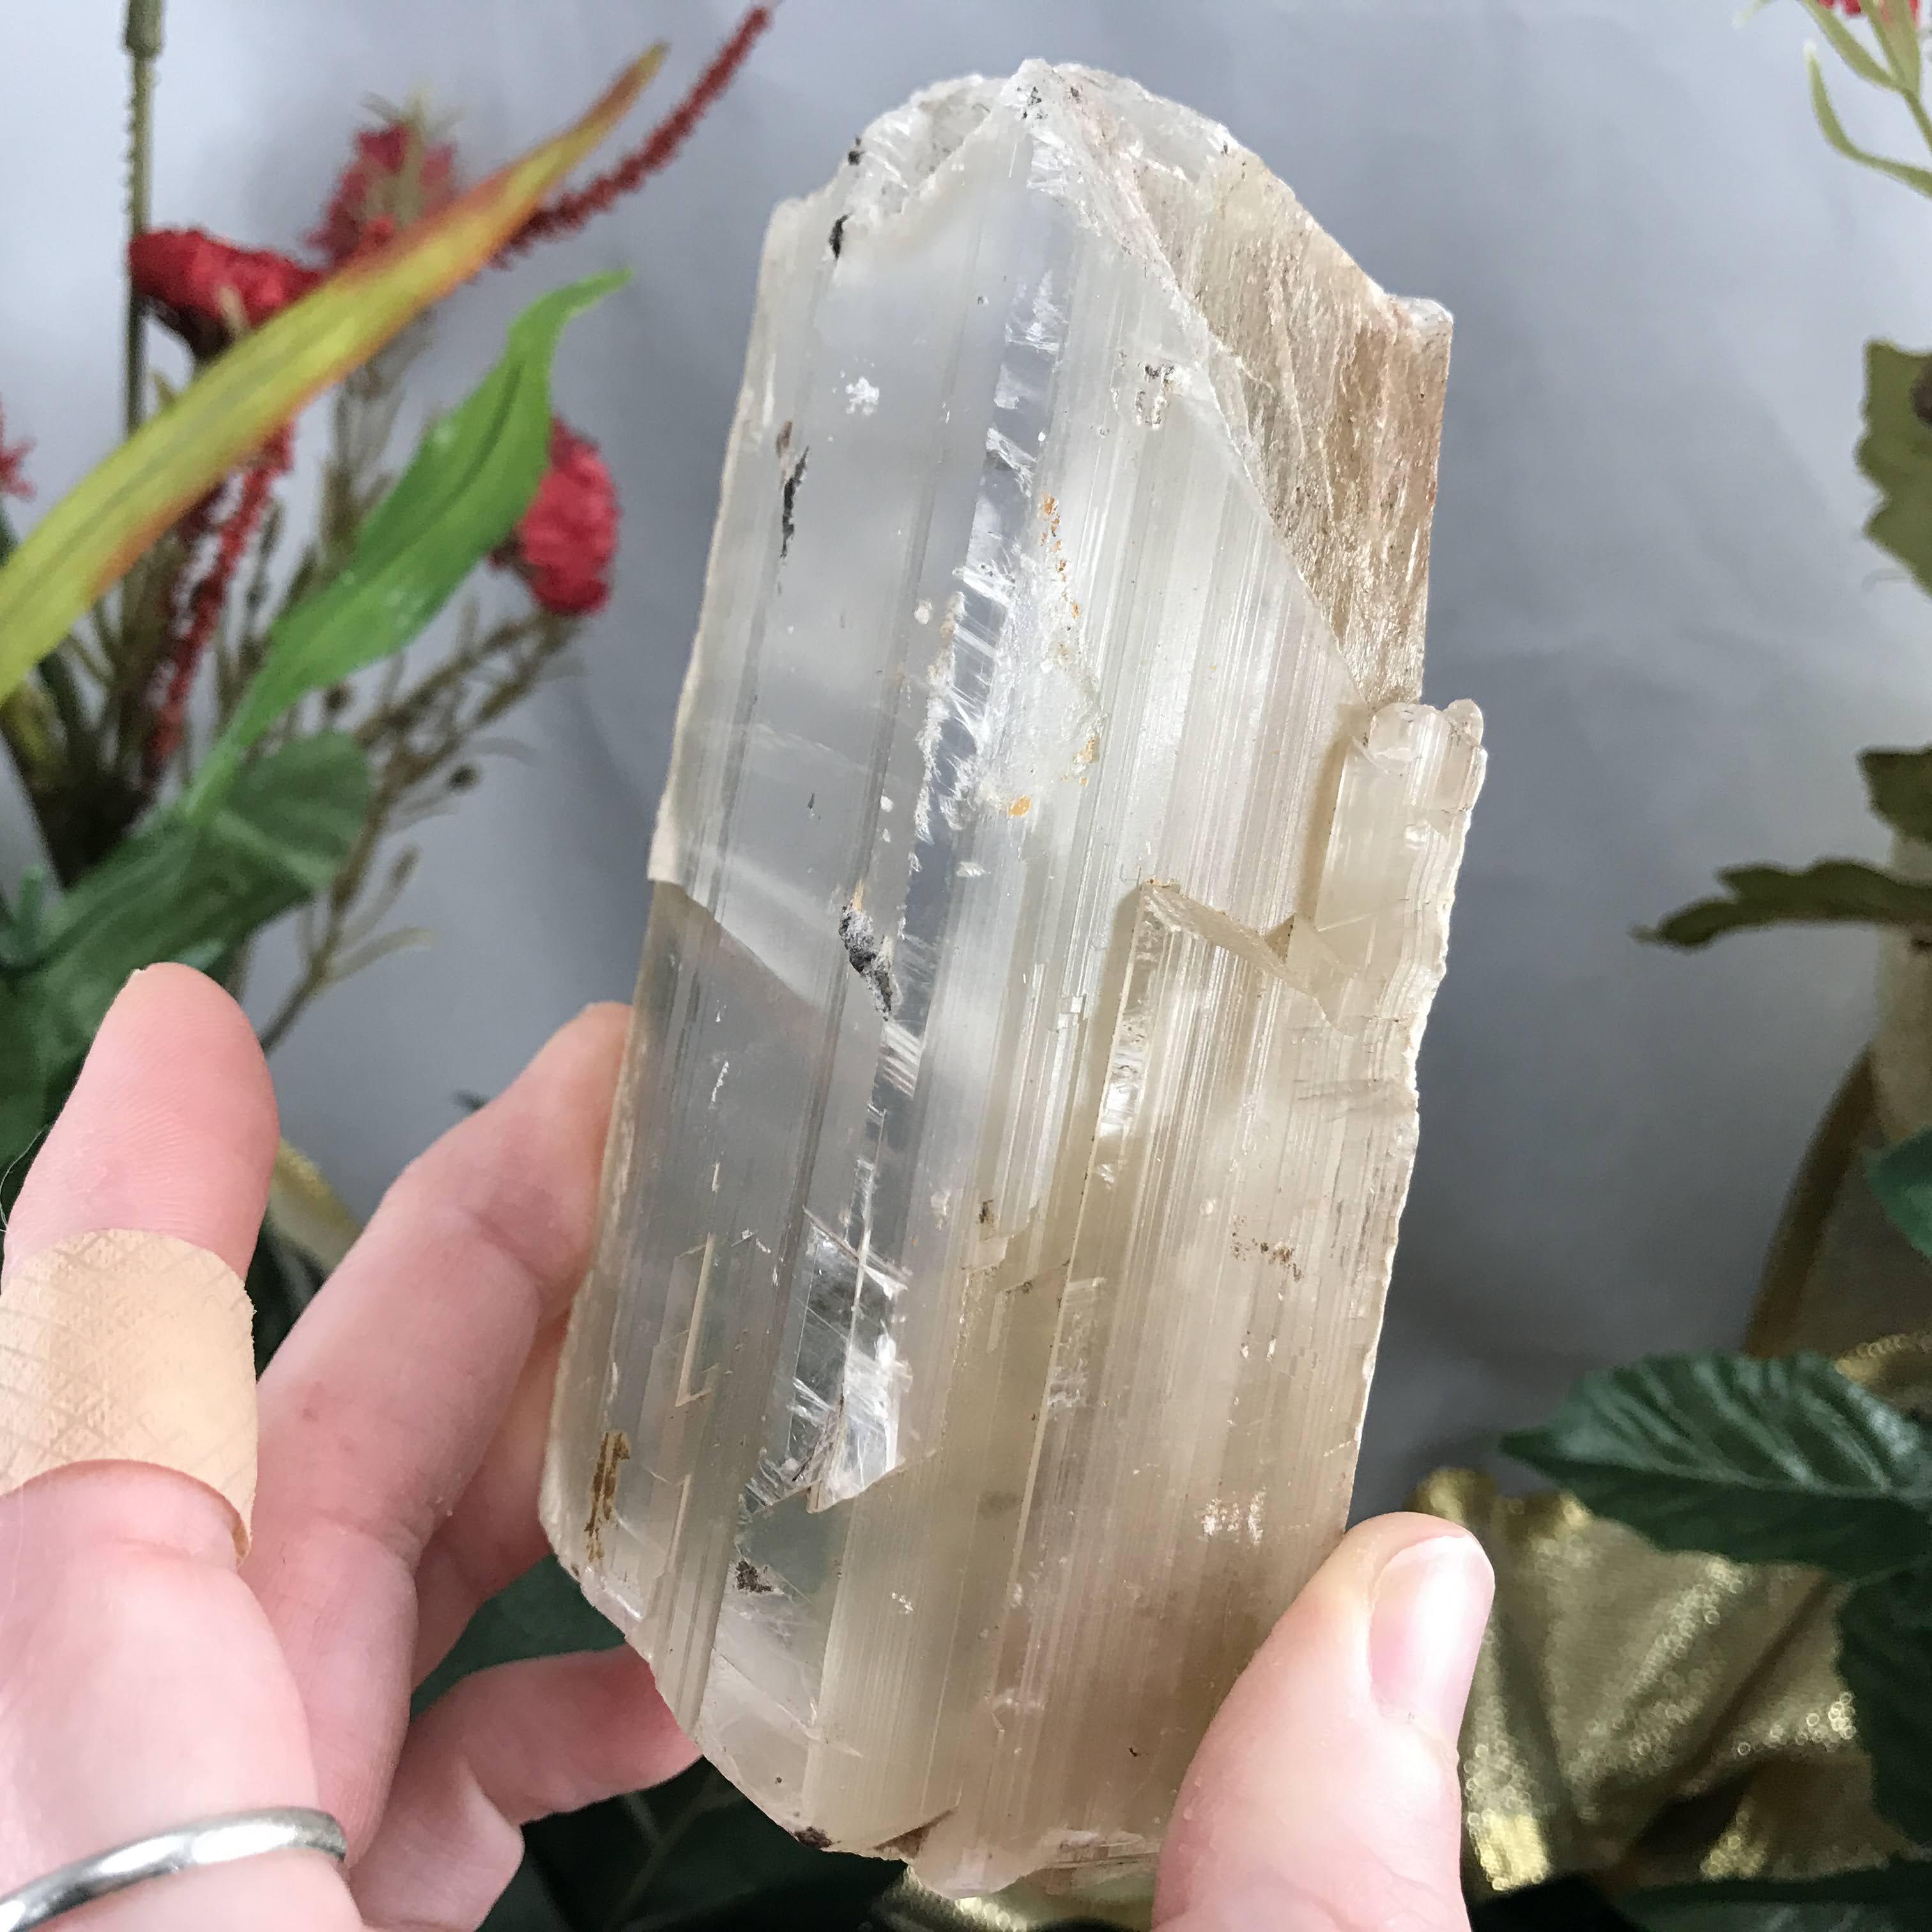 Selenite-BIG OLE GORGEOUS Included Selenite Wand Mineral Specimen! (A338)